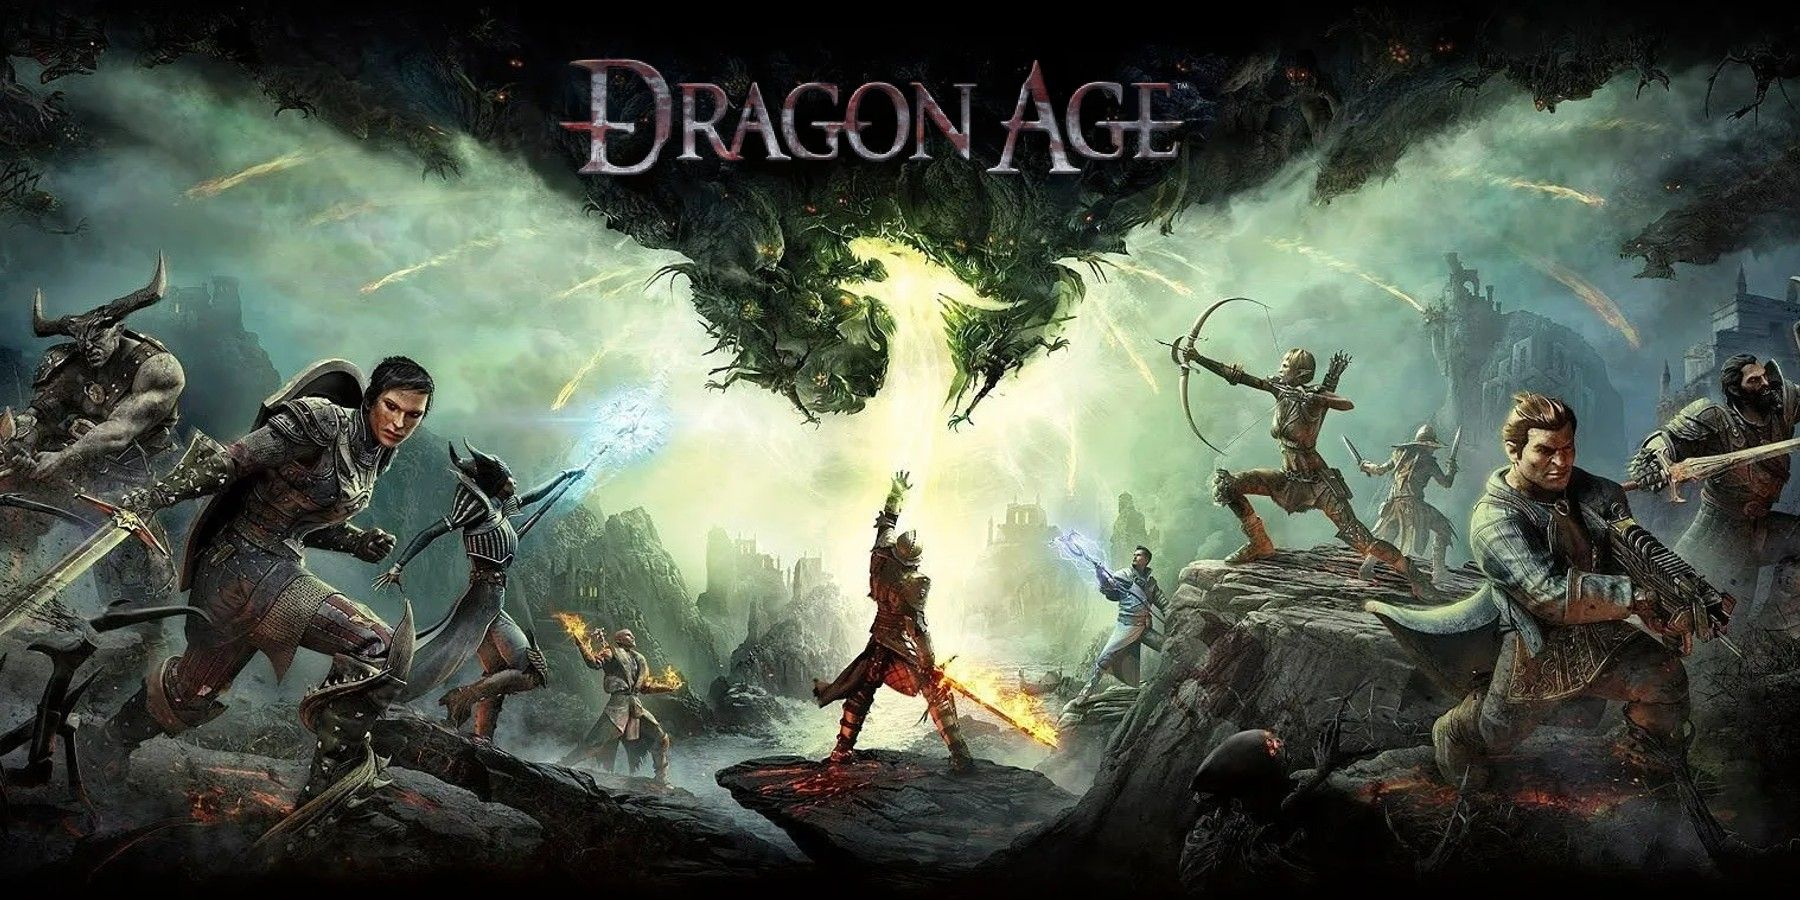 Dragon Age: Origins storyline - Dragon Age: Inquisition Game Guide